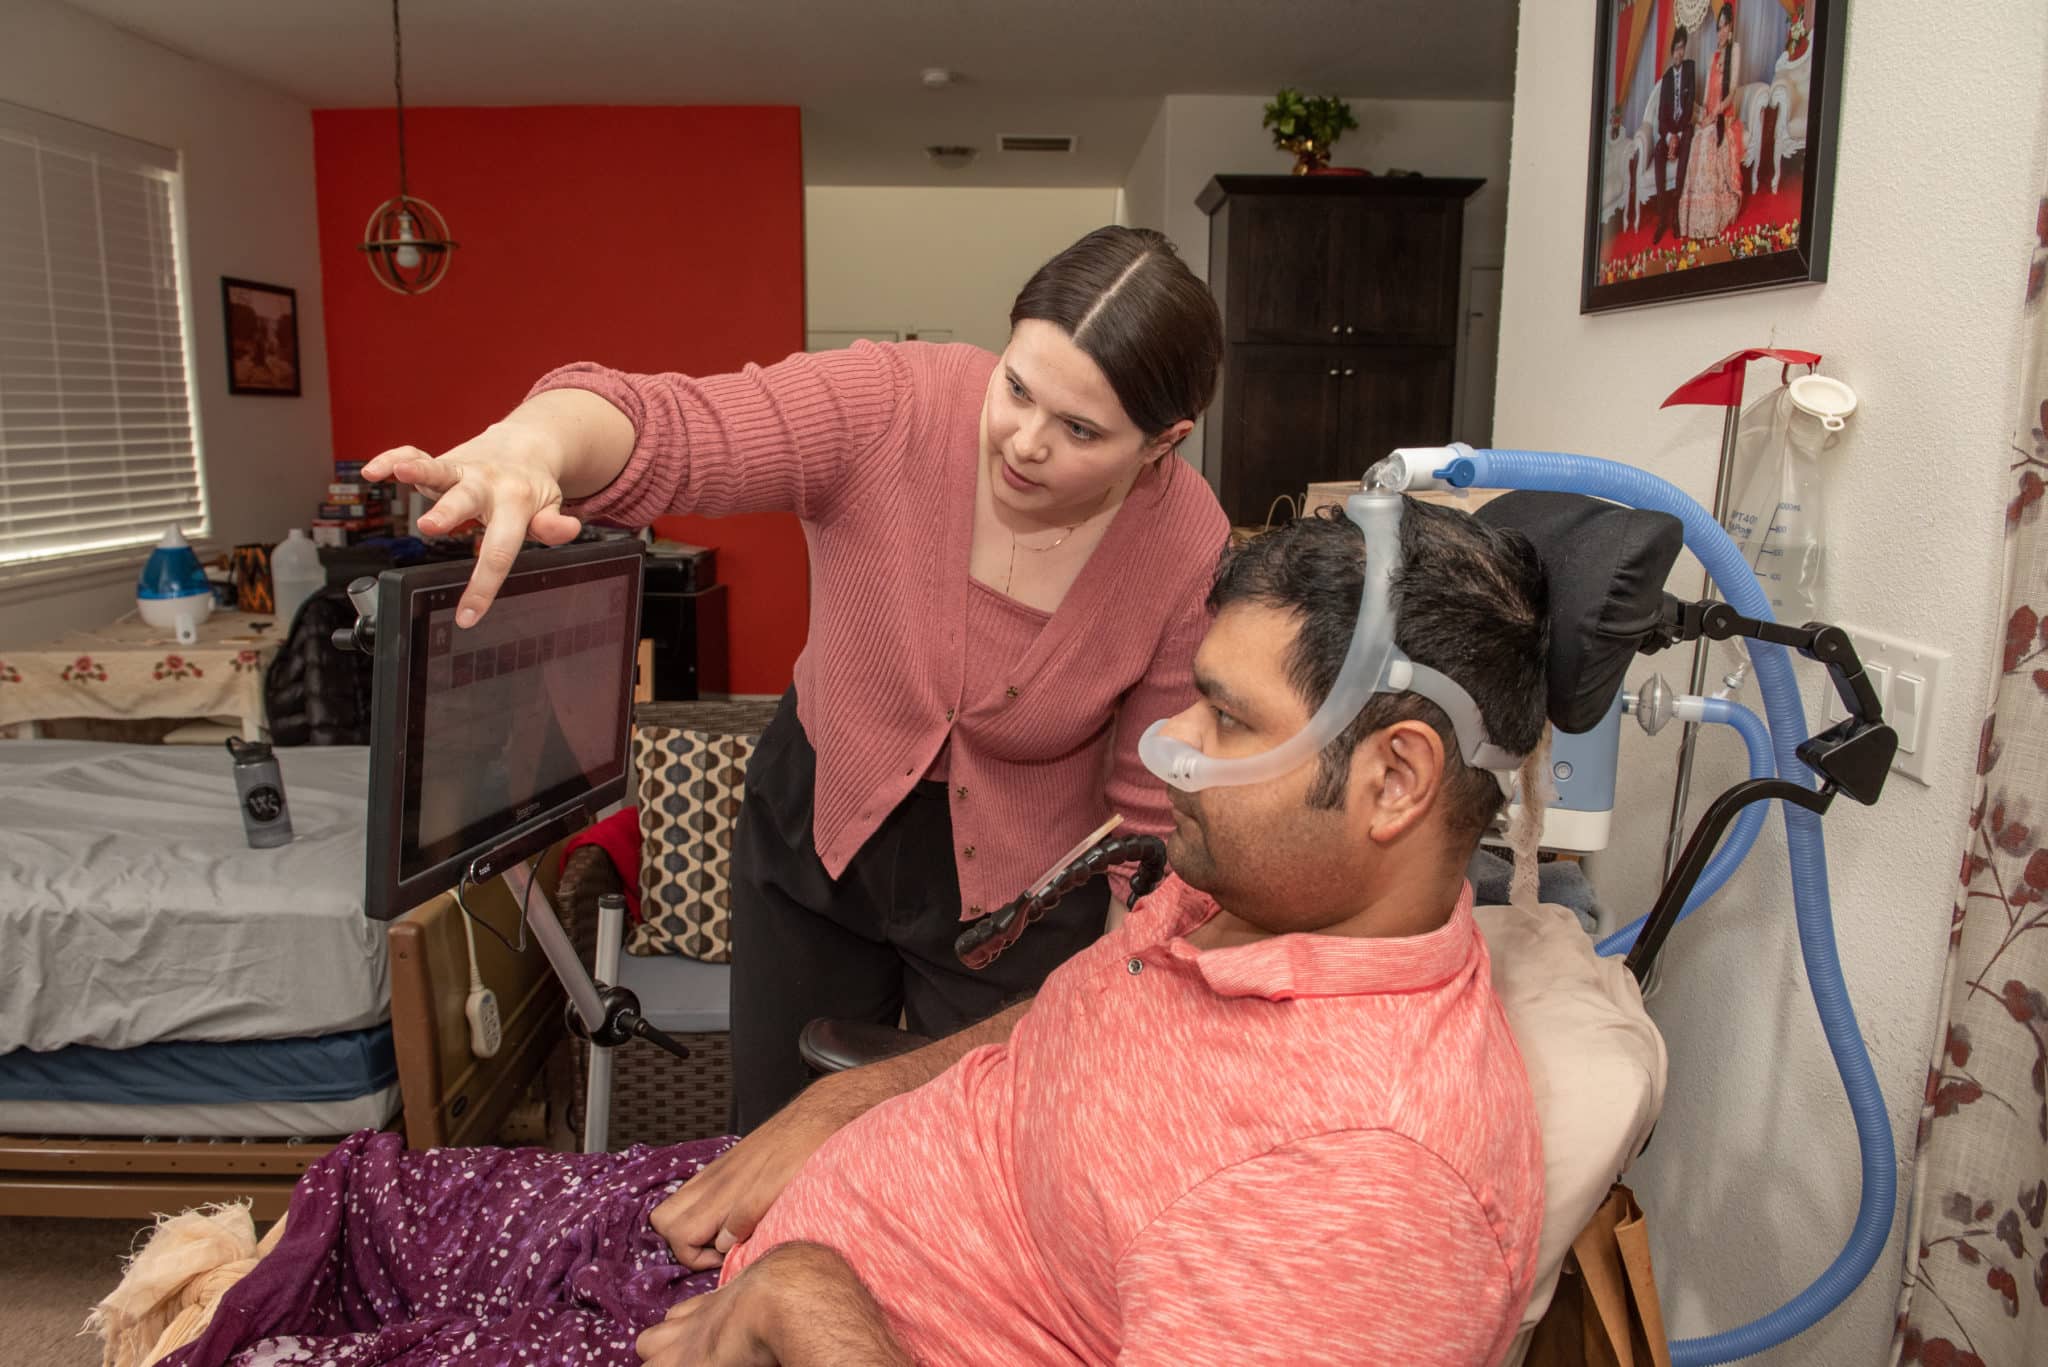 Staff member Ashley demonstrates assistive technology with person with ALS, Humed